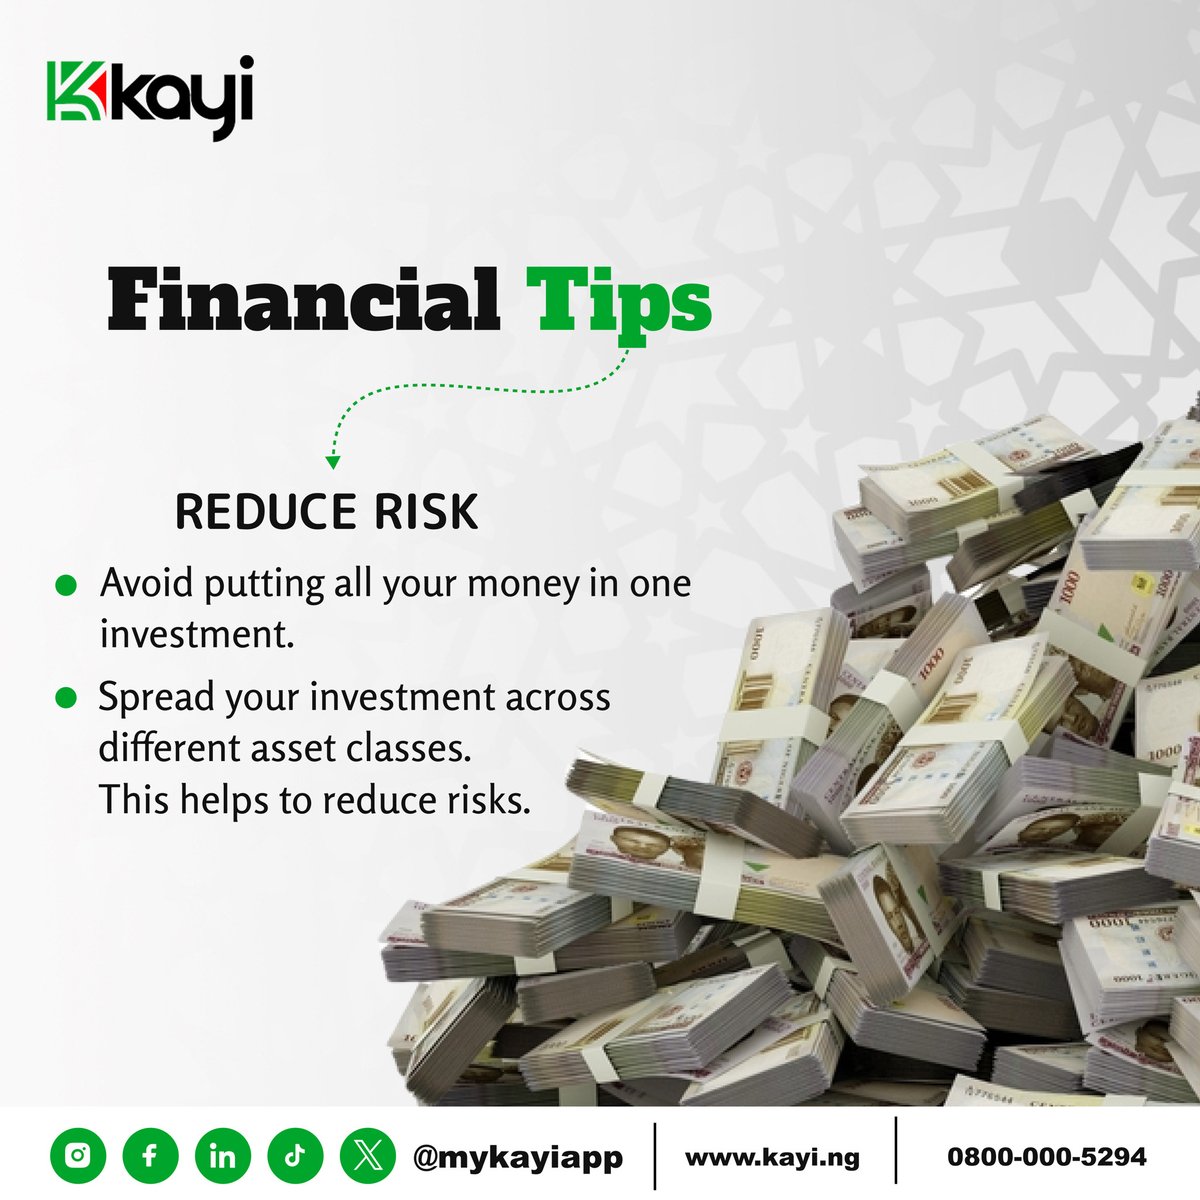 Financial tip
Spread your investments across different asset classes to reduce risk. Don't put all your money in one investment.

#InvestmentDiversification
#RiskReduction
#AssetAllocation
#FinancialResilience
#Mykayiapp
#Kayiway
#Digitalbanking